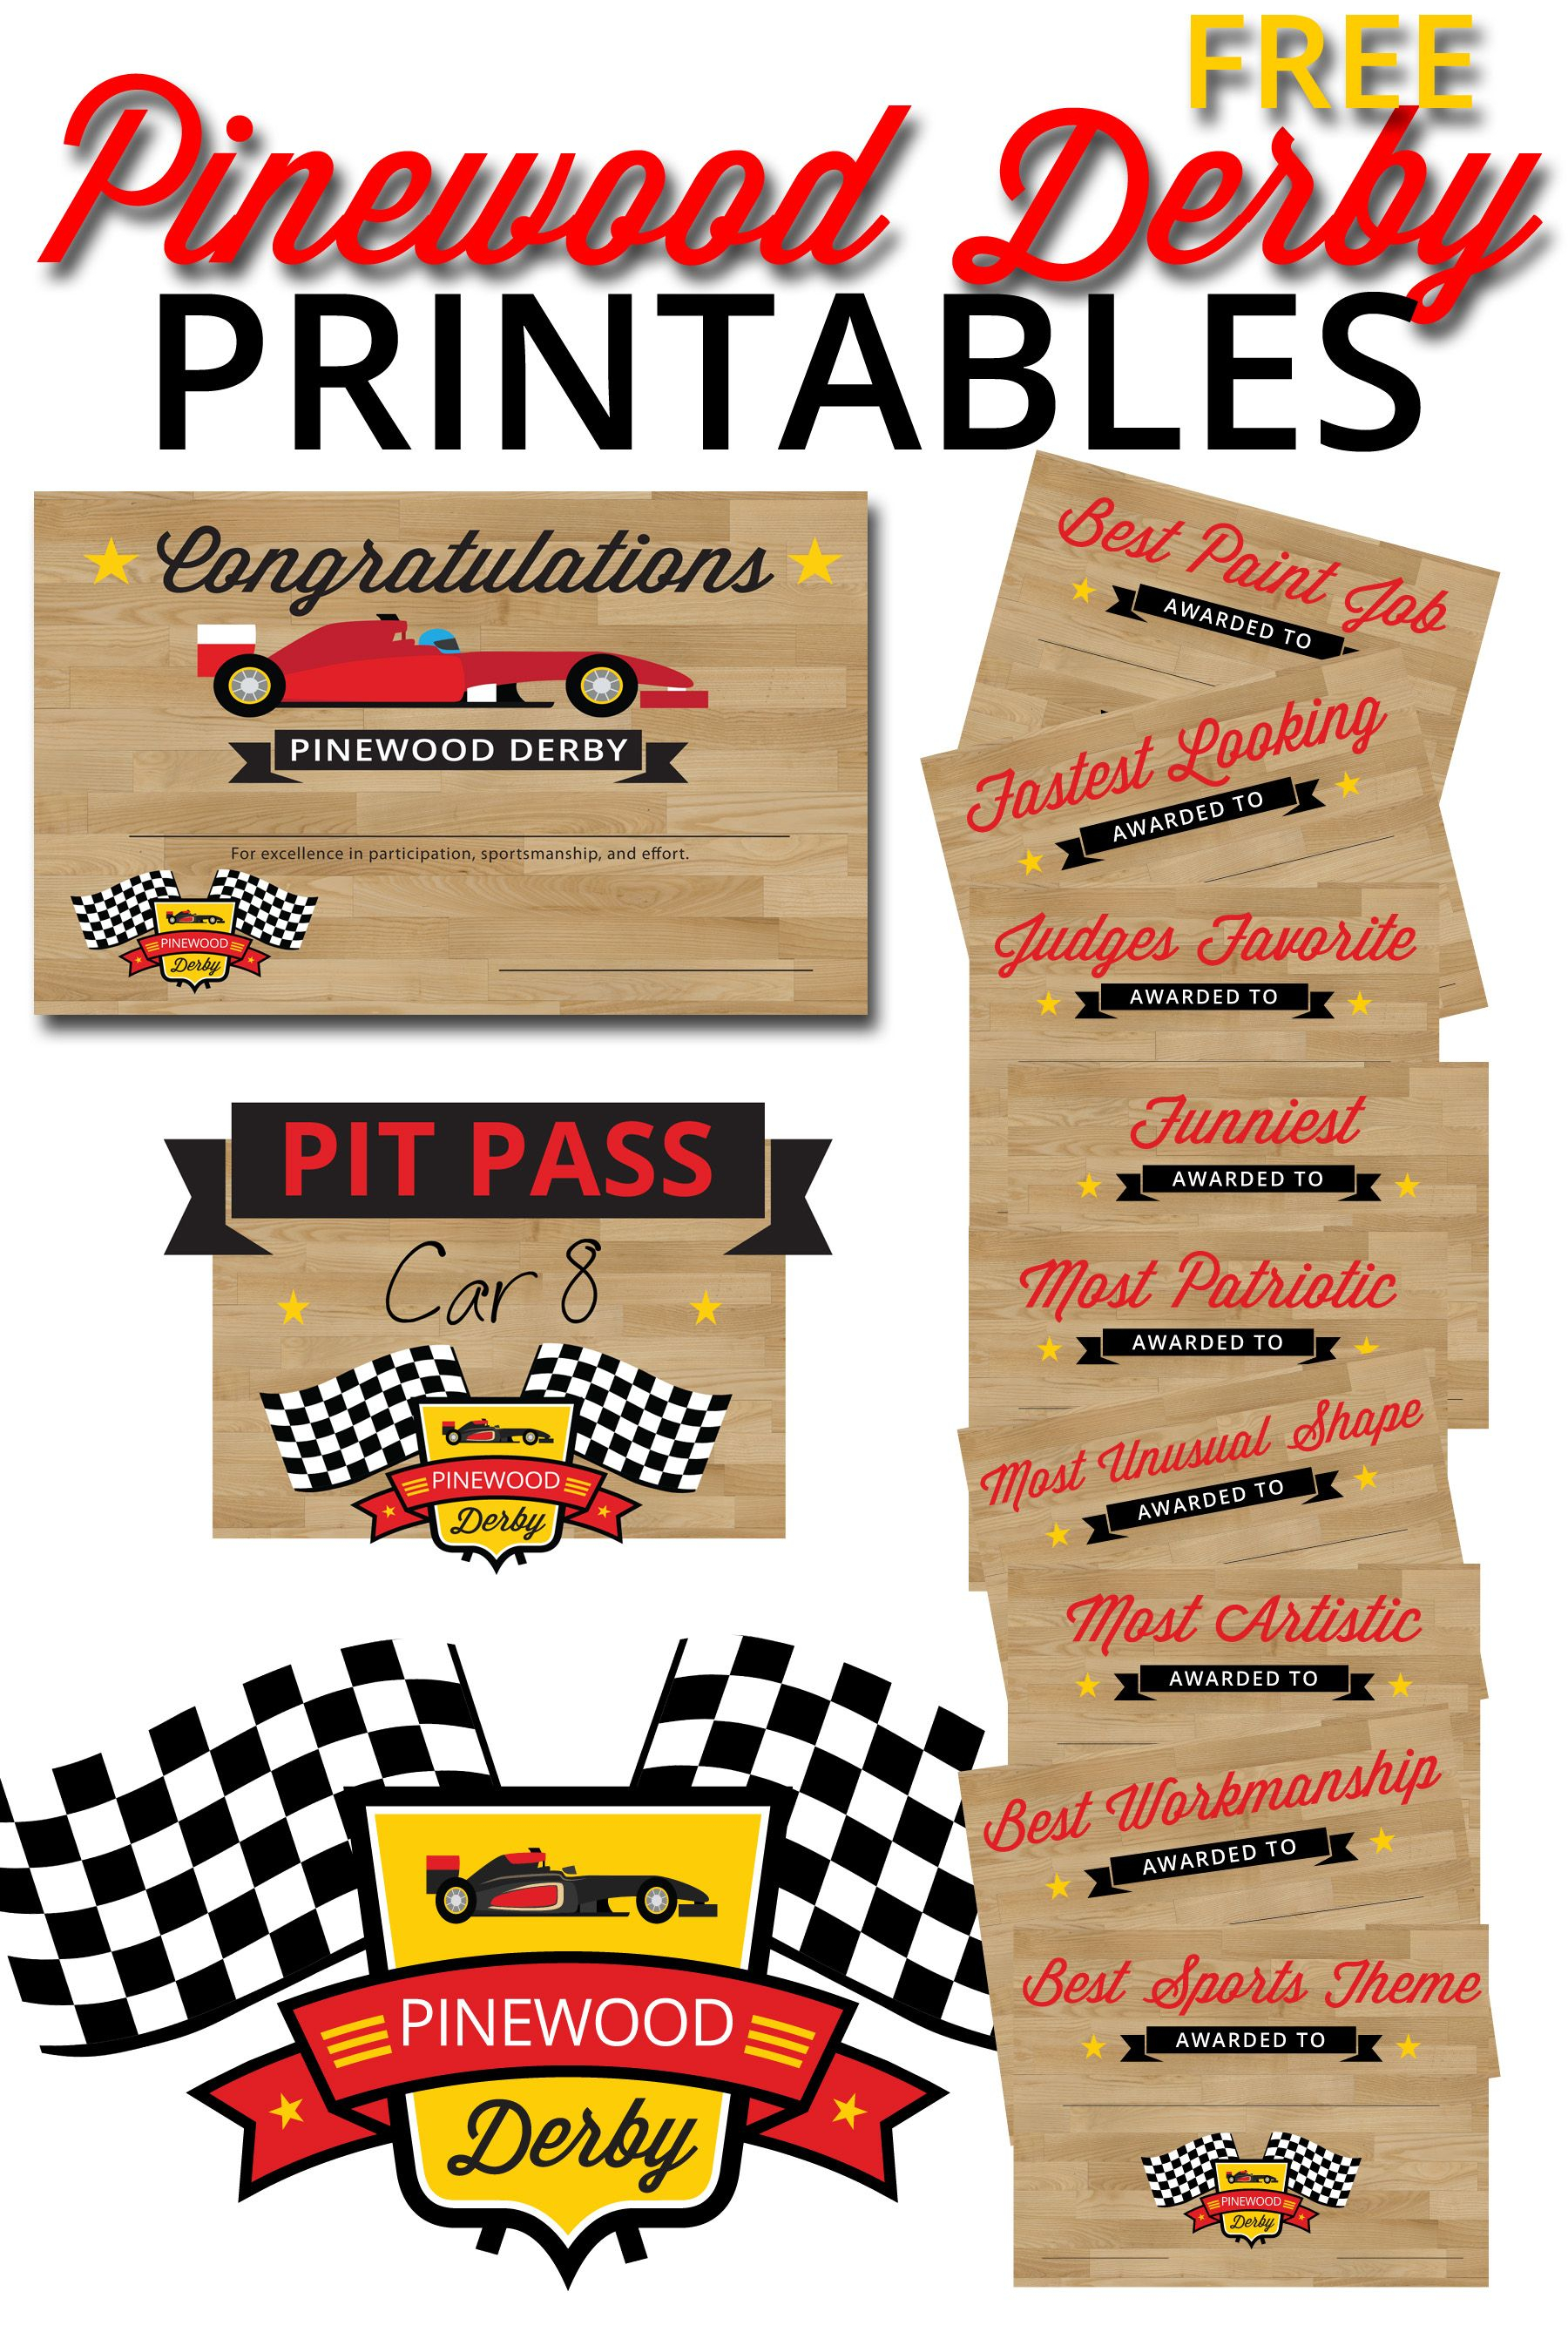 Free Pinewood Derby Printables | The Best Of The Lds Blogs with regard to Pinewood Derby Certificate Template